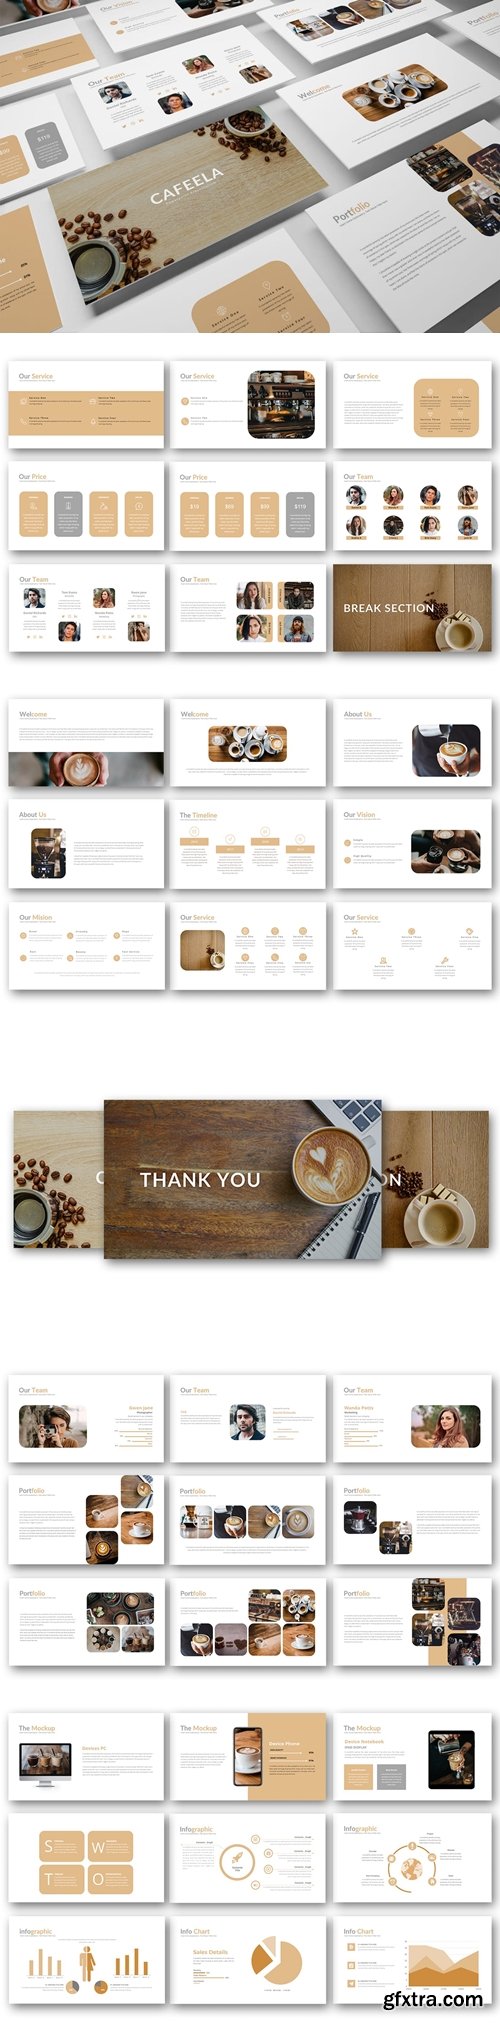 Caffela – Creative Business Powerpoint, Keynote and Google Slides Templates